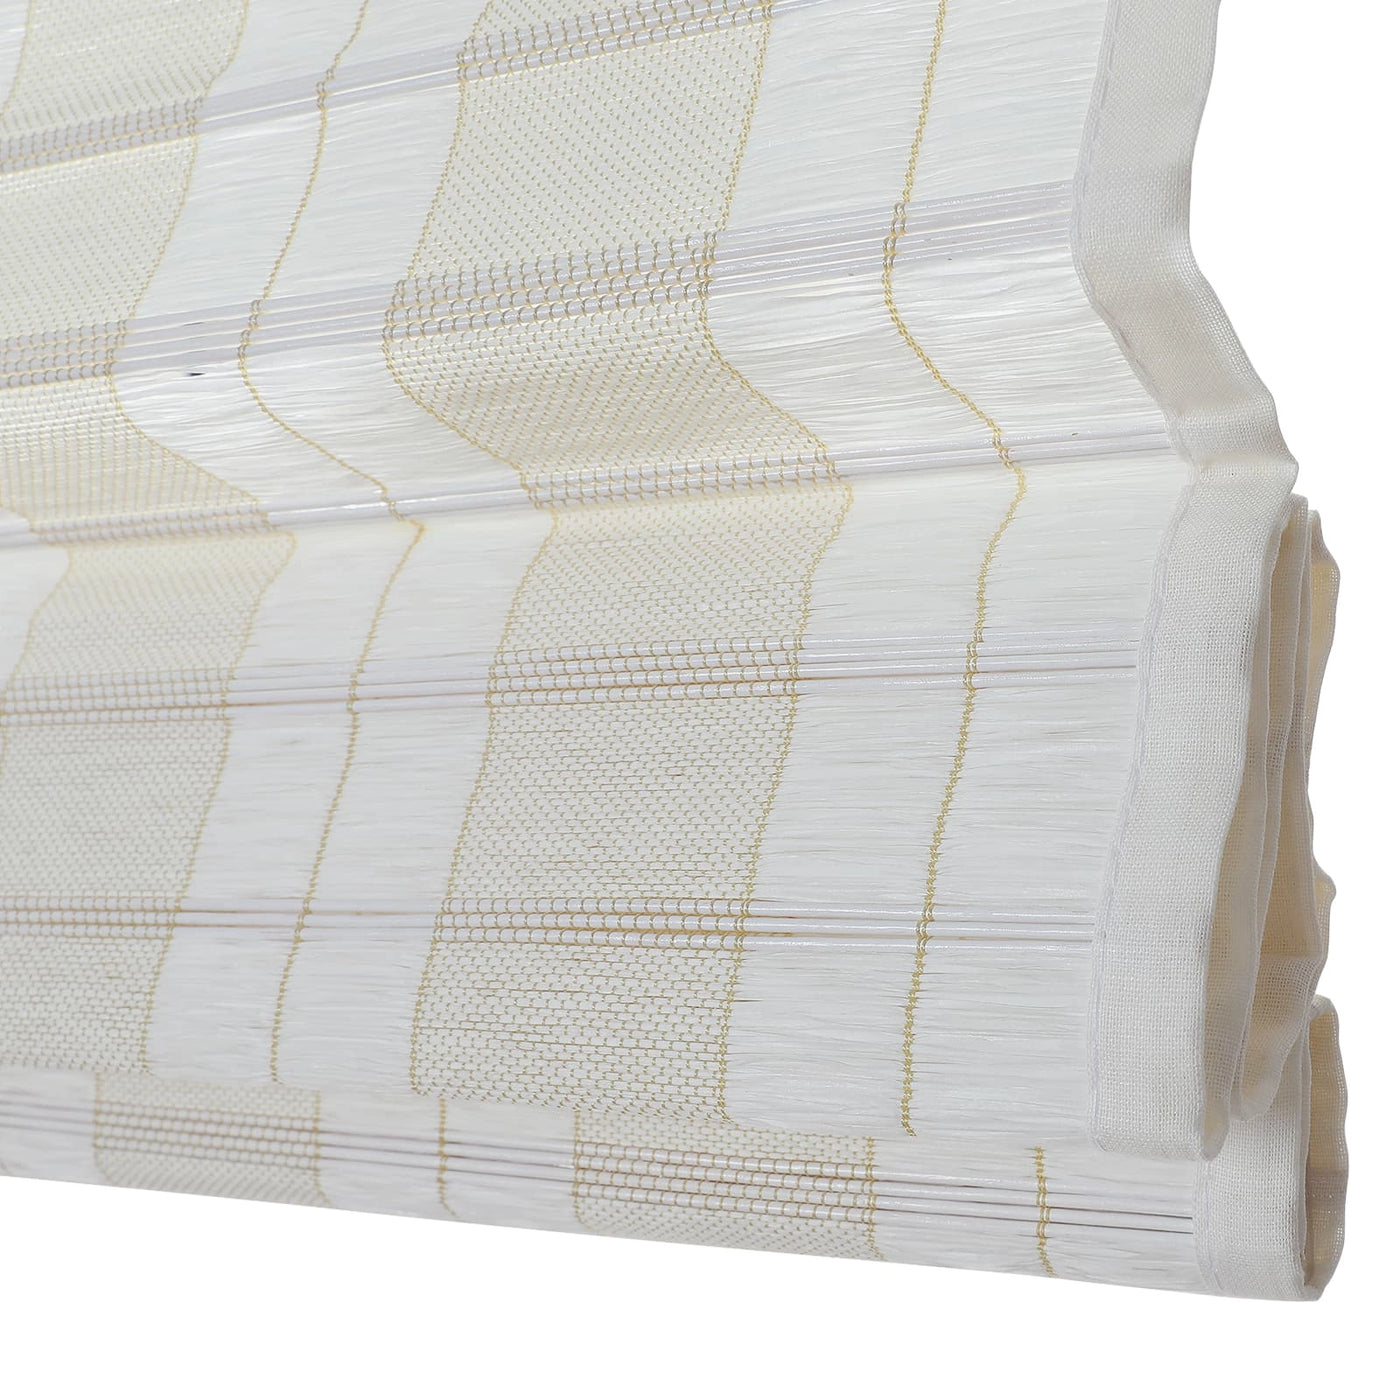 Natural Paper Bamboo Woven Shade - Ivory White